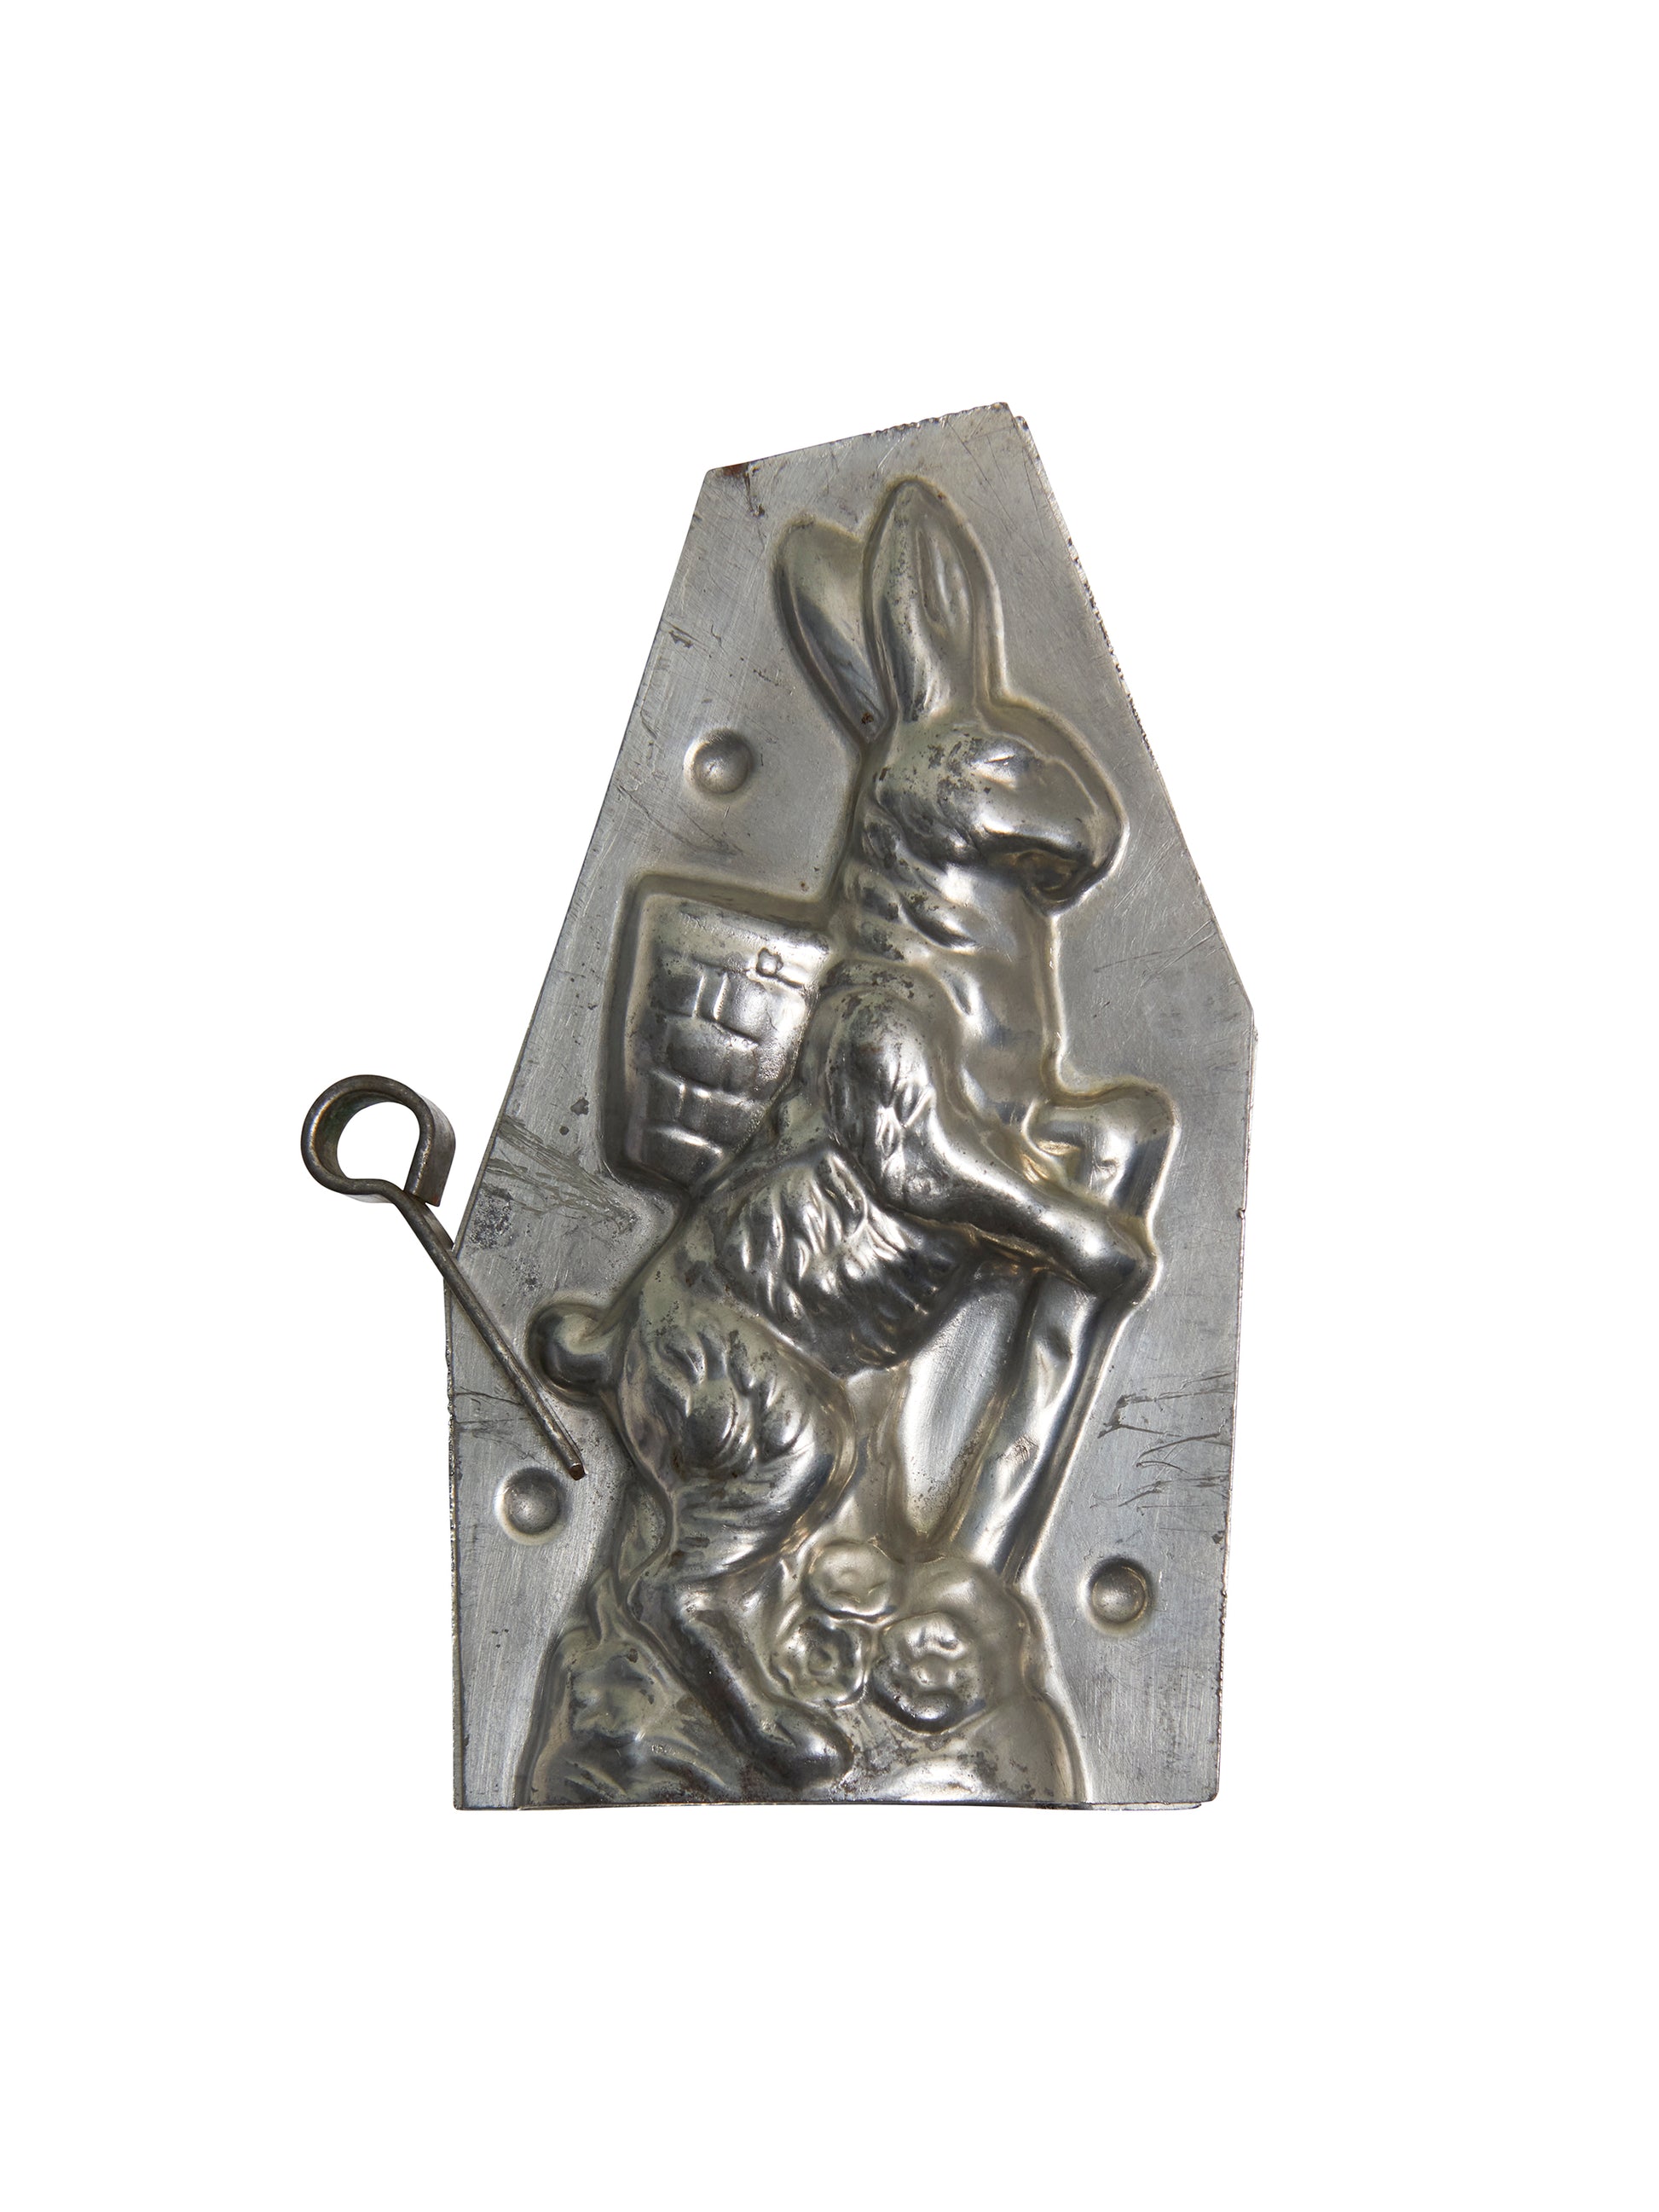 Vintage 1940s Rabbit with Walking Stick Chocolate Mold Weston Table